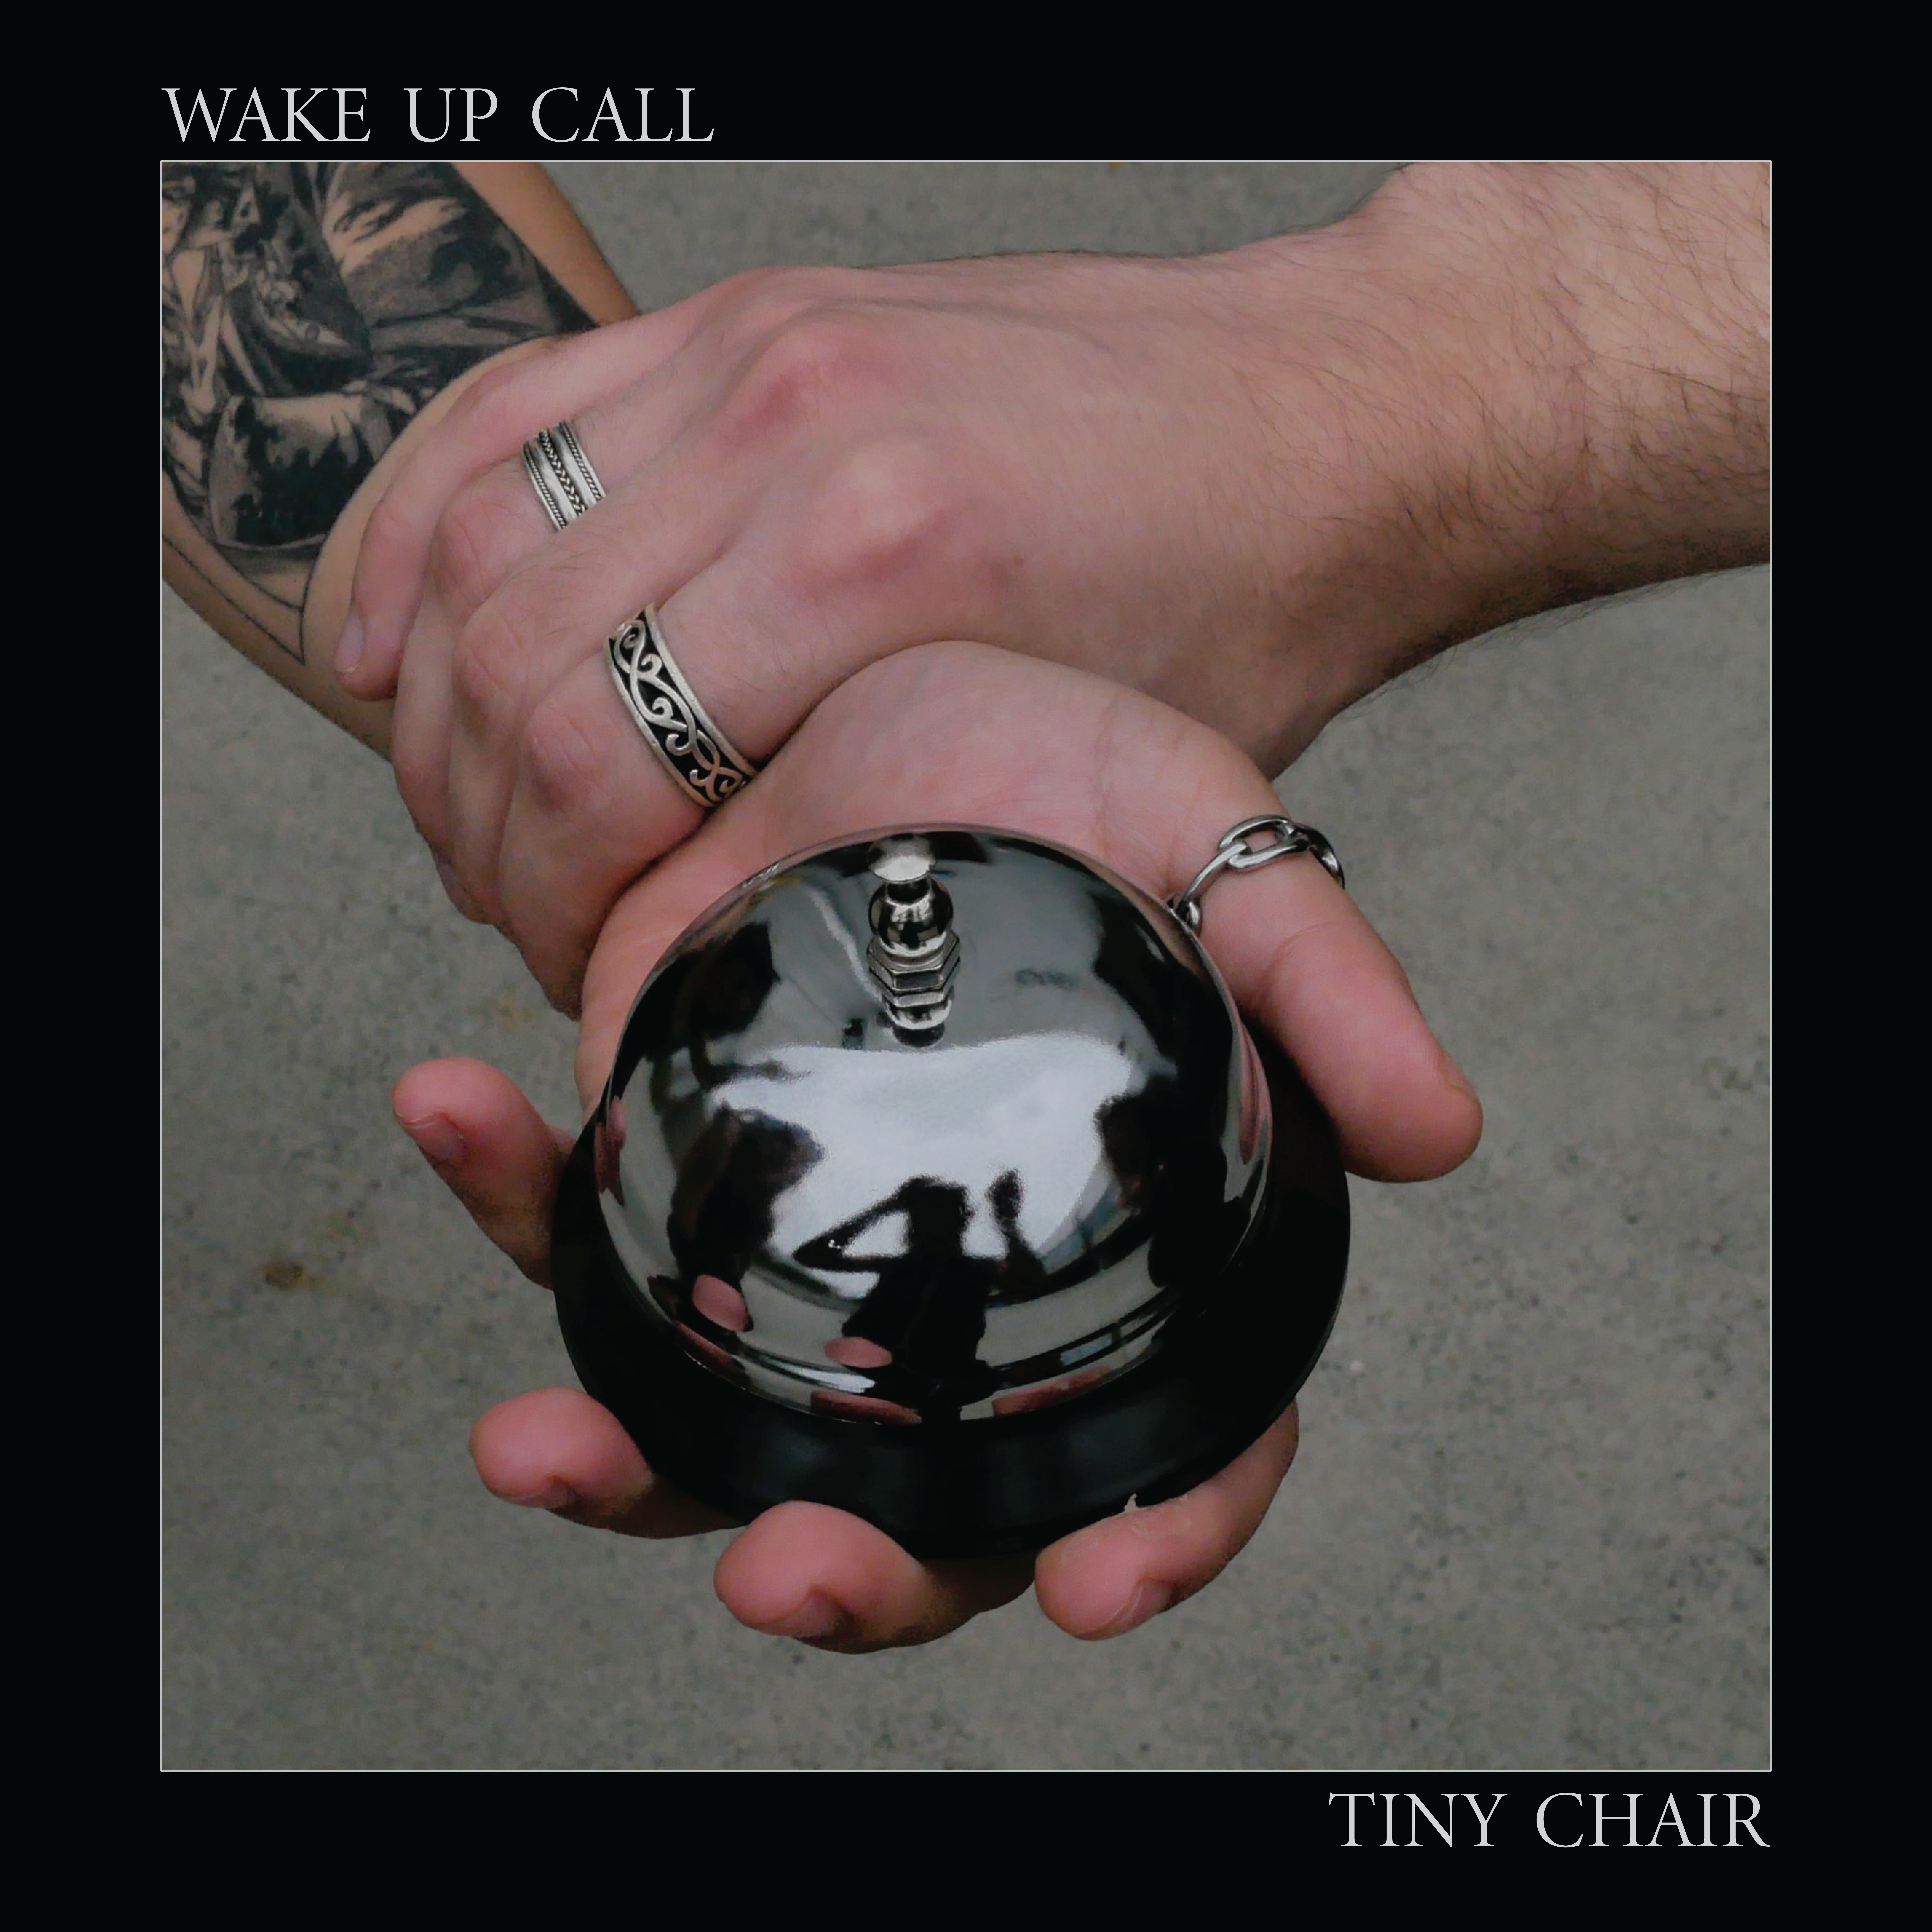 Artwork for track: Wake Up Call by Tiny Chair